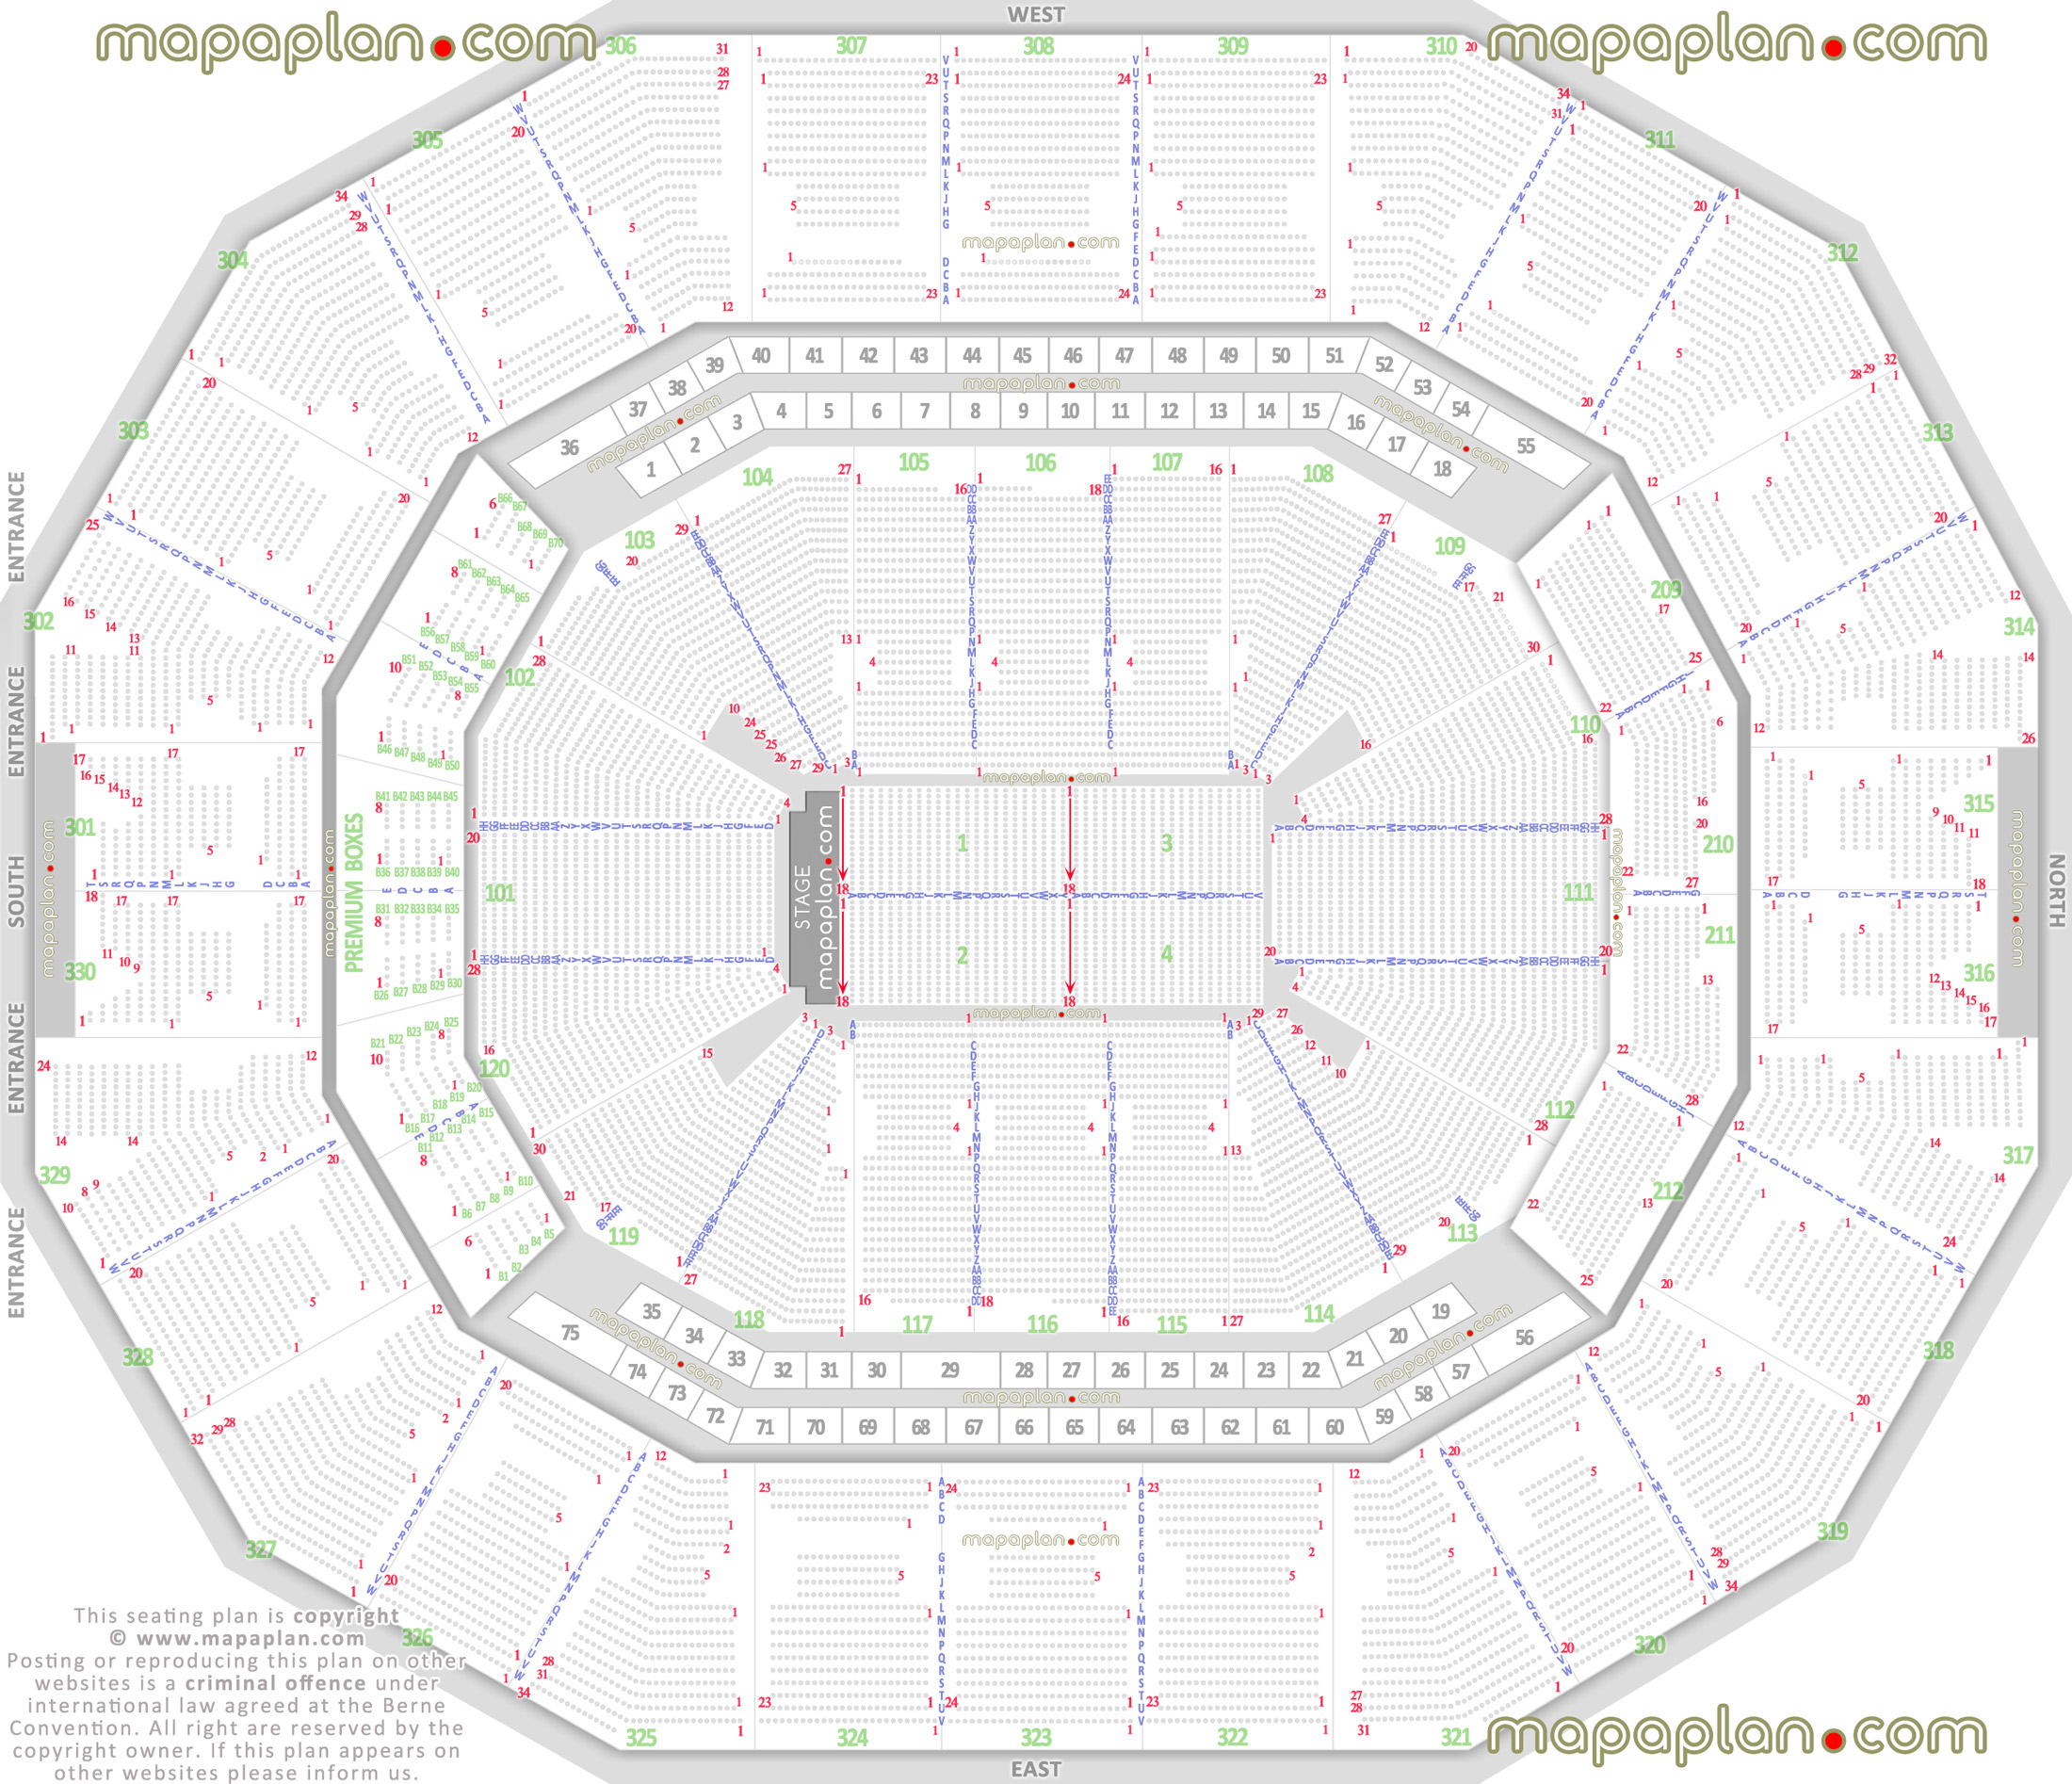 Kfc Yum Center Detailed Seat Row Numbers End Stage Concert